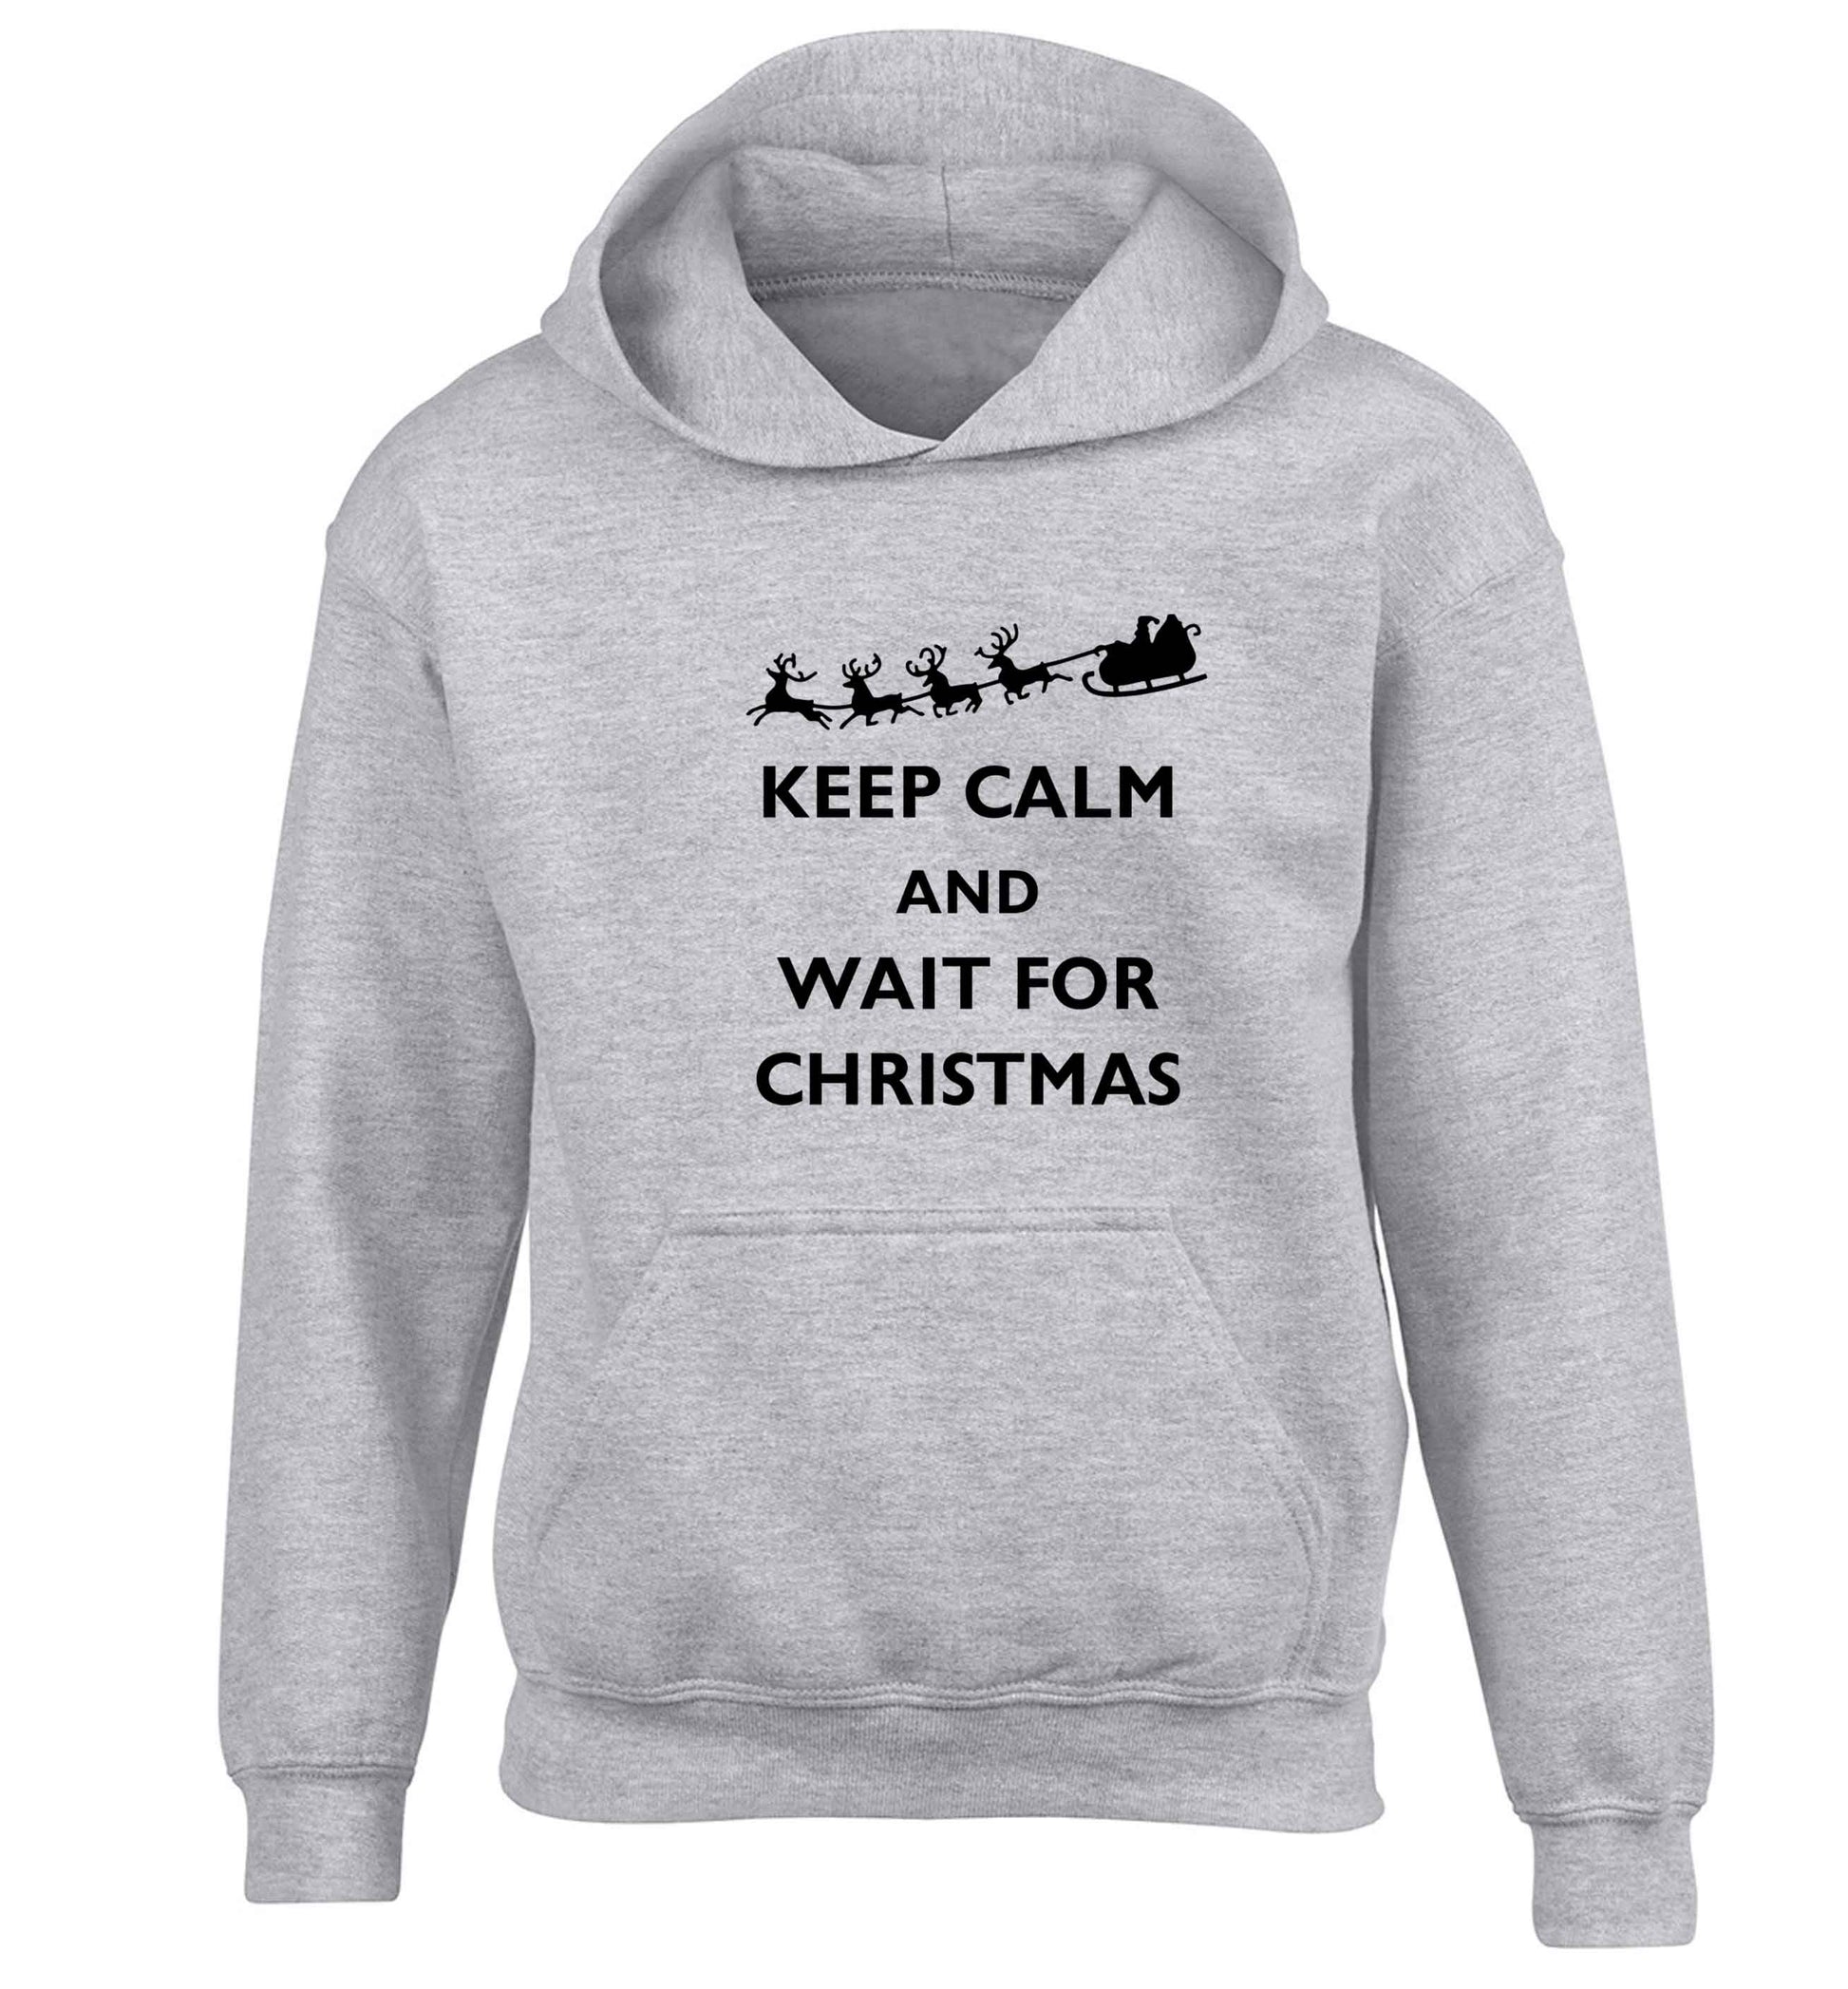 Keep calm and wait for Christmas children's grey hoodie 12-13 Years